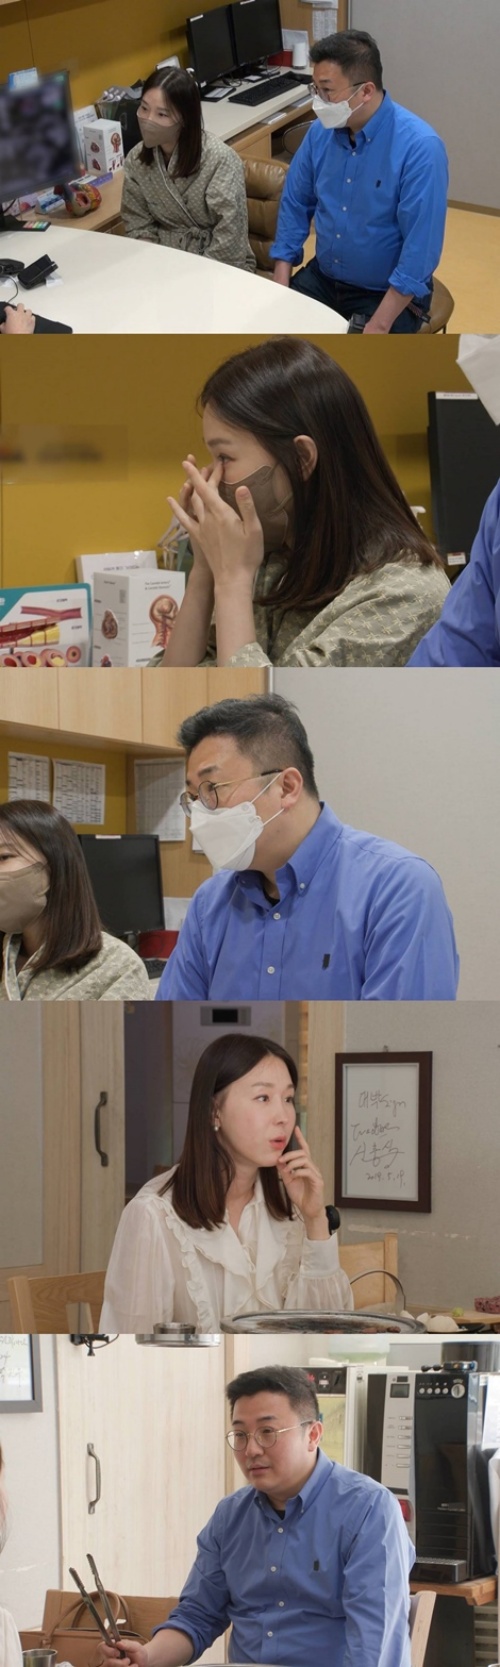 SBS Same Bed, Different Dreams 2: You Are My Dest - Youre My Destiny (hereinafter Youre My Destiny) Lee Ji-hye visits the hospital as a health red light.A shocking diagnosis has been made for Lee Ji-hye, who recently visited the hospital with her husband Moon Jae-wan due to health problems after childbirth.Lee Ji-hye, who seemed healthy, was in a dizzying situation where she did not breathe after giving birth.An unexpected disease was found in the test, and even the doctor made a diagnosis like Cheongcheon wall power that it was difficult to cure.Lee Ji-hye said, I am a mother of two children.Meanwhile, Lee Ji-hye Moon Jae-wan and his wife in the somber Danger had gone to the divorce Danger (?) after giving birth.The second emotional battle after childbirth grew out of control, and Lee Ji-hye said, Do not you like me?I also said that I did not like my brother. The studio is also serious, and What is this?It was even the situation that the husband of the innocent husband Moon Jae-wan made the first counterattack at Lee Ji-hyes words and embarrassed Lee Ji-hye.Moon Jae-wan, who always accepted 100% of Lee Ji-hyes story, said, I felt like Wife ignored me. Lee Ji-hye is said to have failed to talk to Moon Jae-wans story for the first time.The two can overcome this difficulty, and the story of Lee Ji-hye Moon Jae-wans roller coaster can be seen in You are my destiny which is broadcasted at 10 pm on the 2nd.You are my destiny.